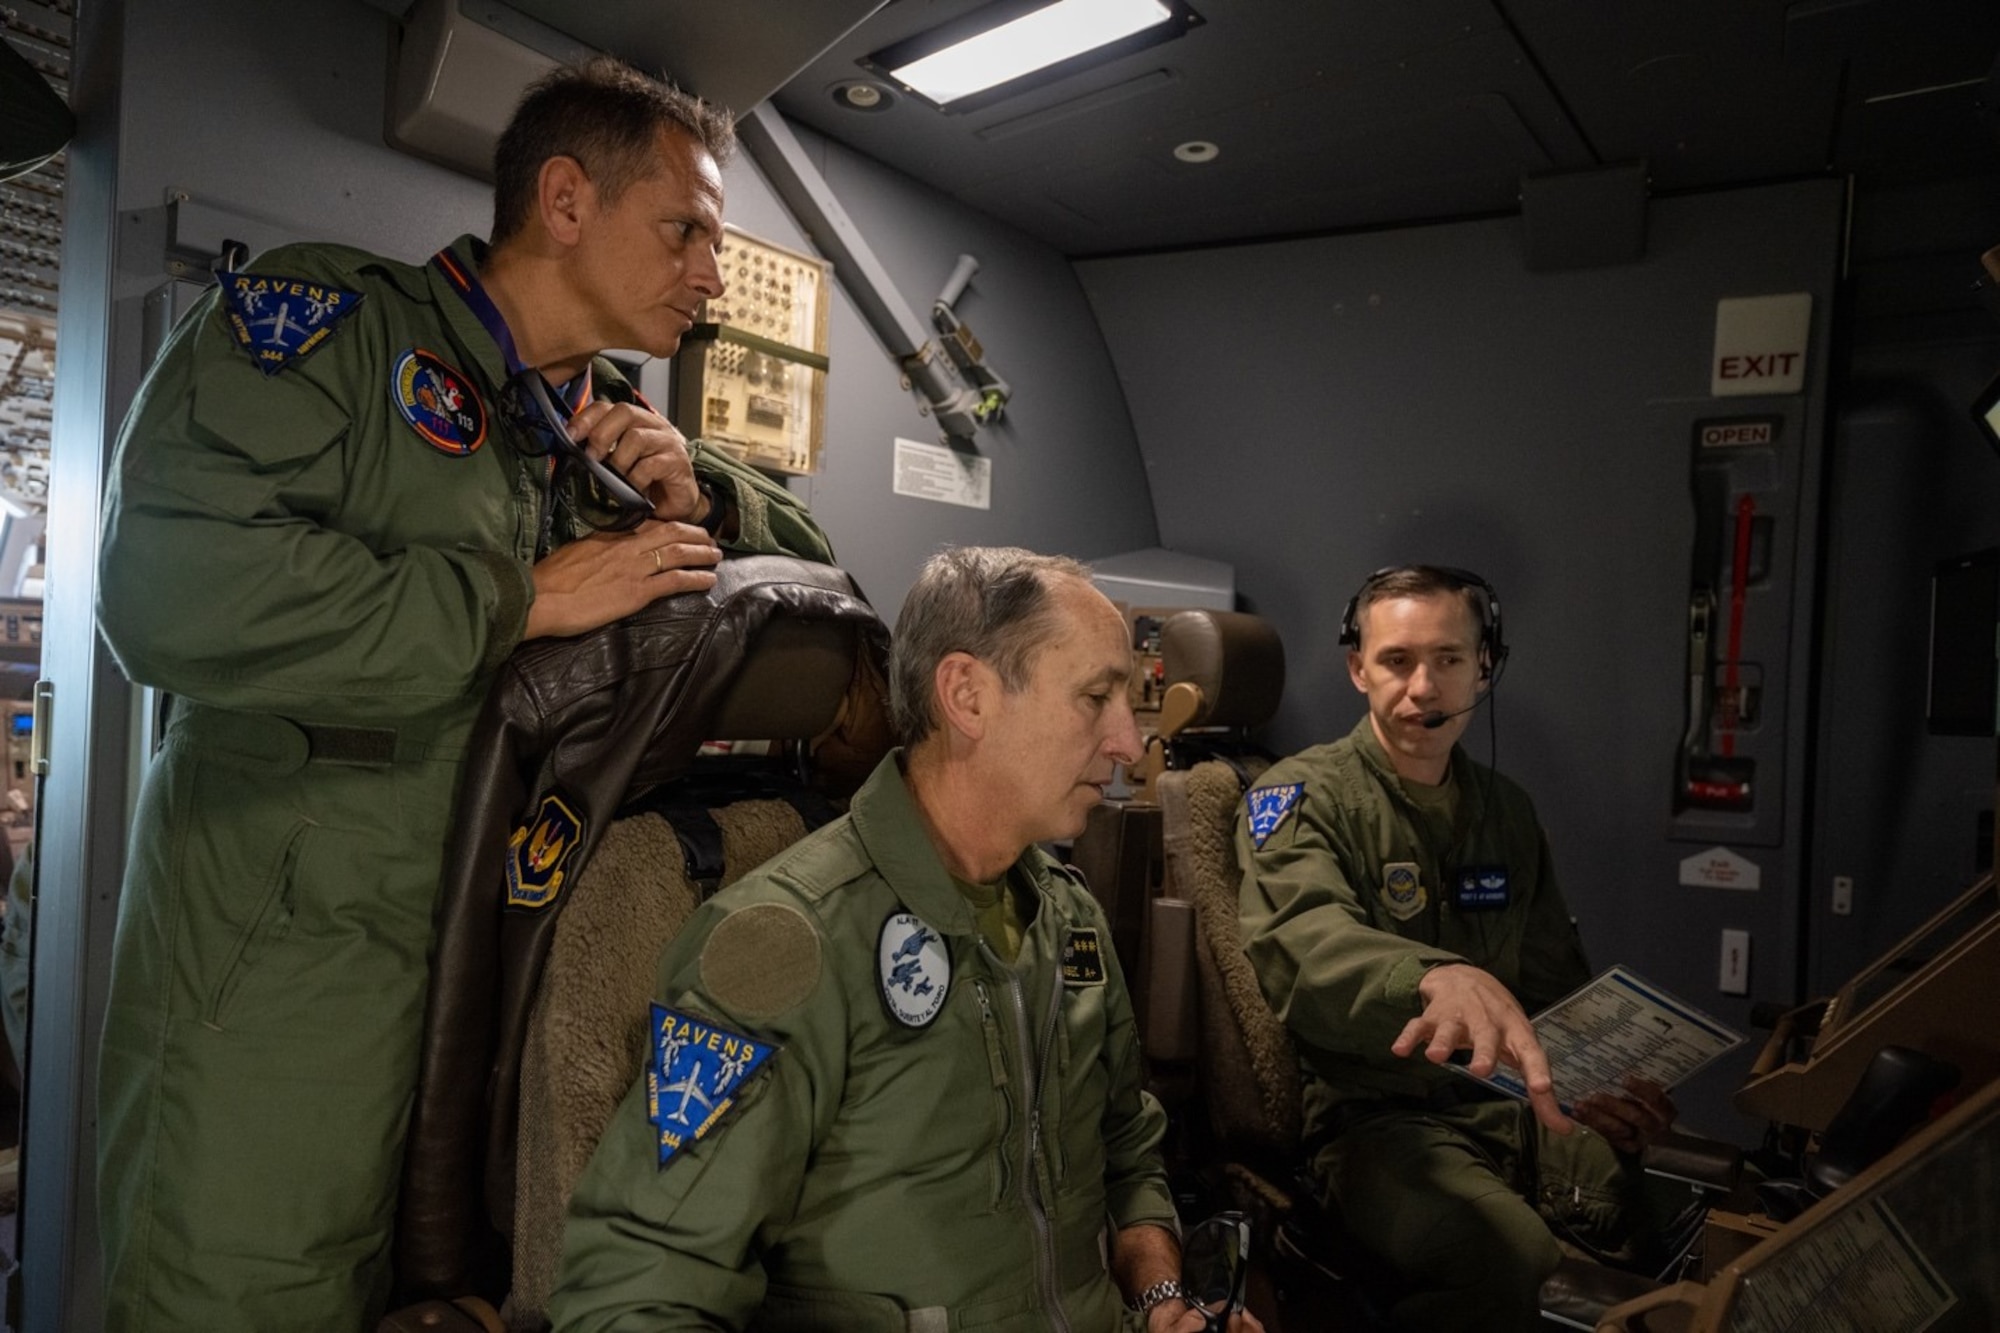 U.S. Air Force Master Sgt. Clay Wonders (right), KC-46A Employment Concept Exercise senior enlisted lead, explains boom station procedures to Spanish Air Force commanders Col. Enrique Fernandez Ambel, 11th Wing commander, and Lt. Col. Ignacio Zulueta Martin, 11th Eurofighter Group commander, during an orientation flight April 18, 2022. As a sign of camaraderie, the commanders were gifted patches from McConnell Air Force Base’s 344th Air Refueling Squadron. In solidarity, the Spanish commanders wore them for the duration of the flight. The mission provided an opportunity to build relations with the ECE’s Spanish hosts and showcase Pegasus capabilities in international operations.  (U.S. Air Force photo by Staff Sgt. Nathan Eckert)